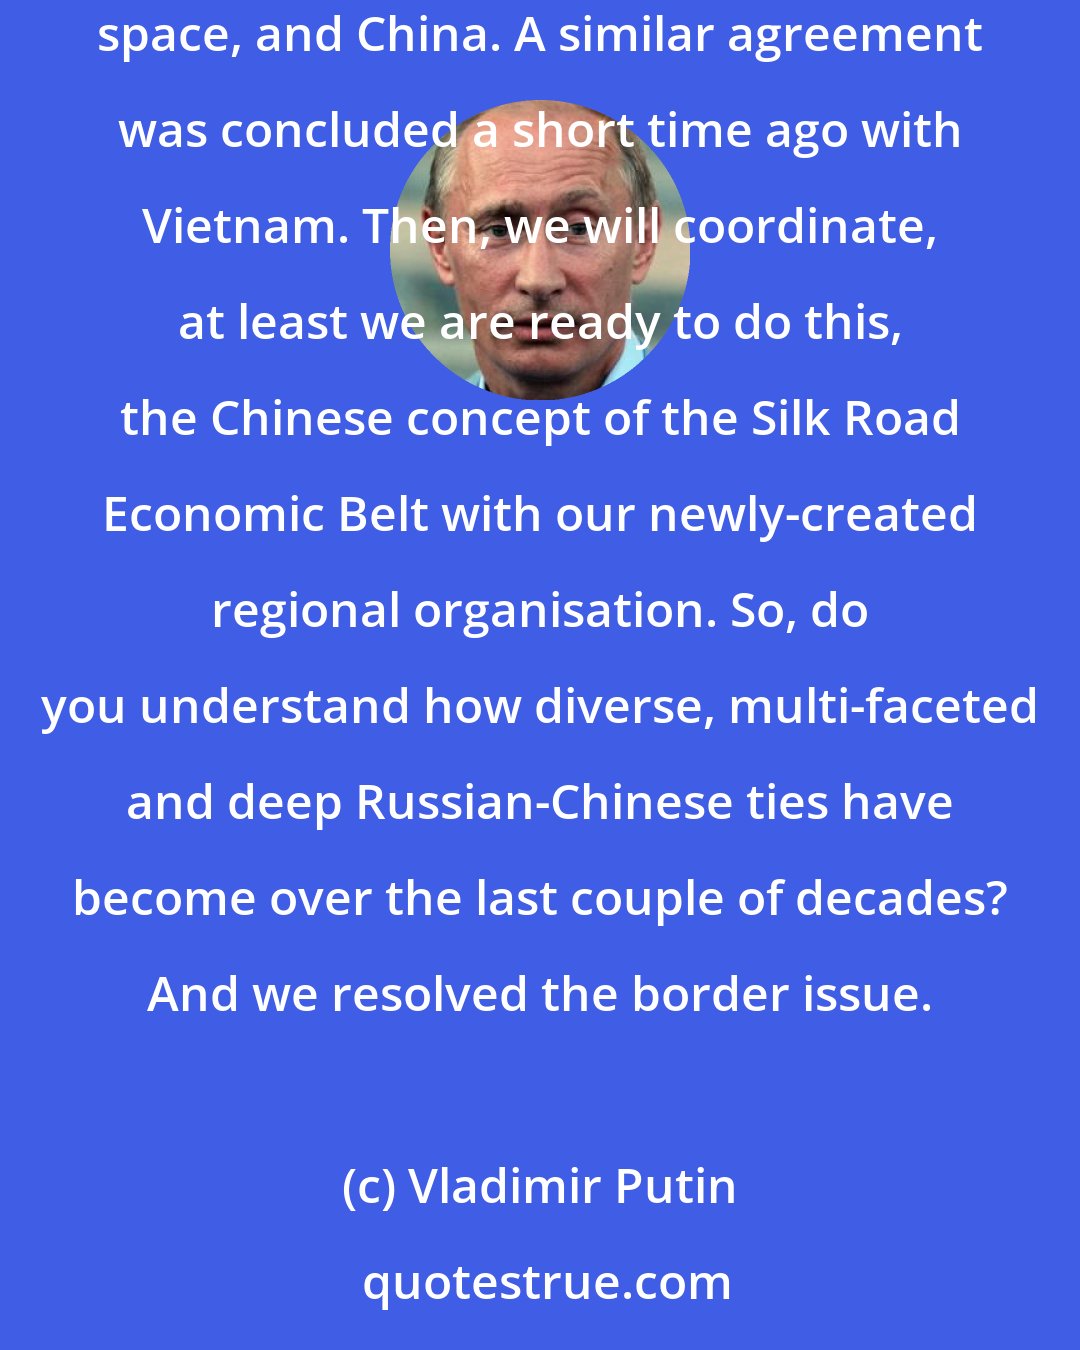 Vladimir Putin: Now we are talking about concluding a free trade agreement between the Eurasian Economic Council, recently established in the post-Soviet space, and China. A similar agreement was concluded a short time ago with Vietnam. Then, we will coordinate, at least we are ready to do this, the Chinese concept of the Silk Road Economic Belt with our newly-created regional organisation. So, do you understand how diverse, multi-faceted and deep Russian-Chinese ties have become over the last couple of decades? And we resolved the border issue.